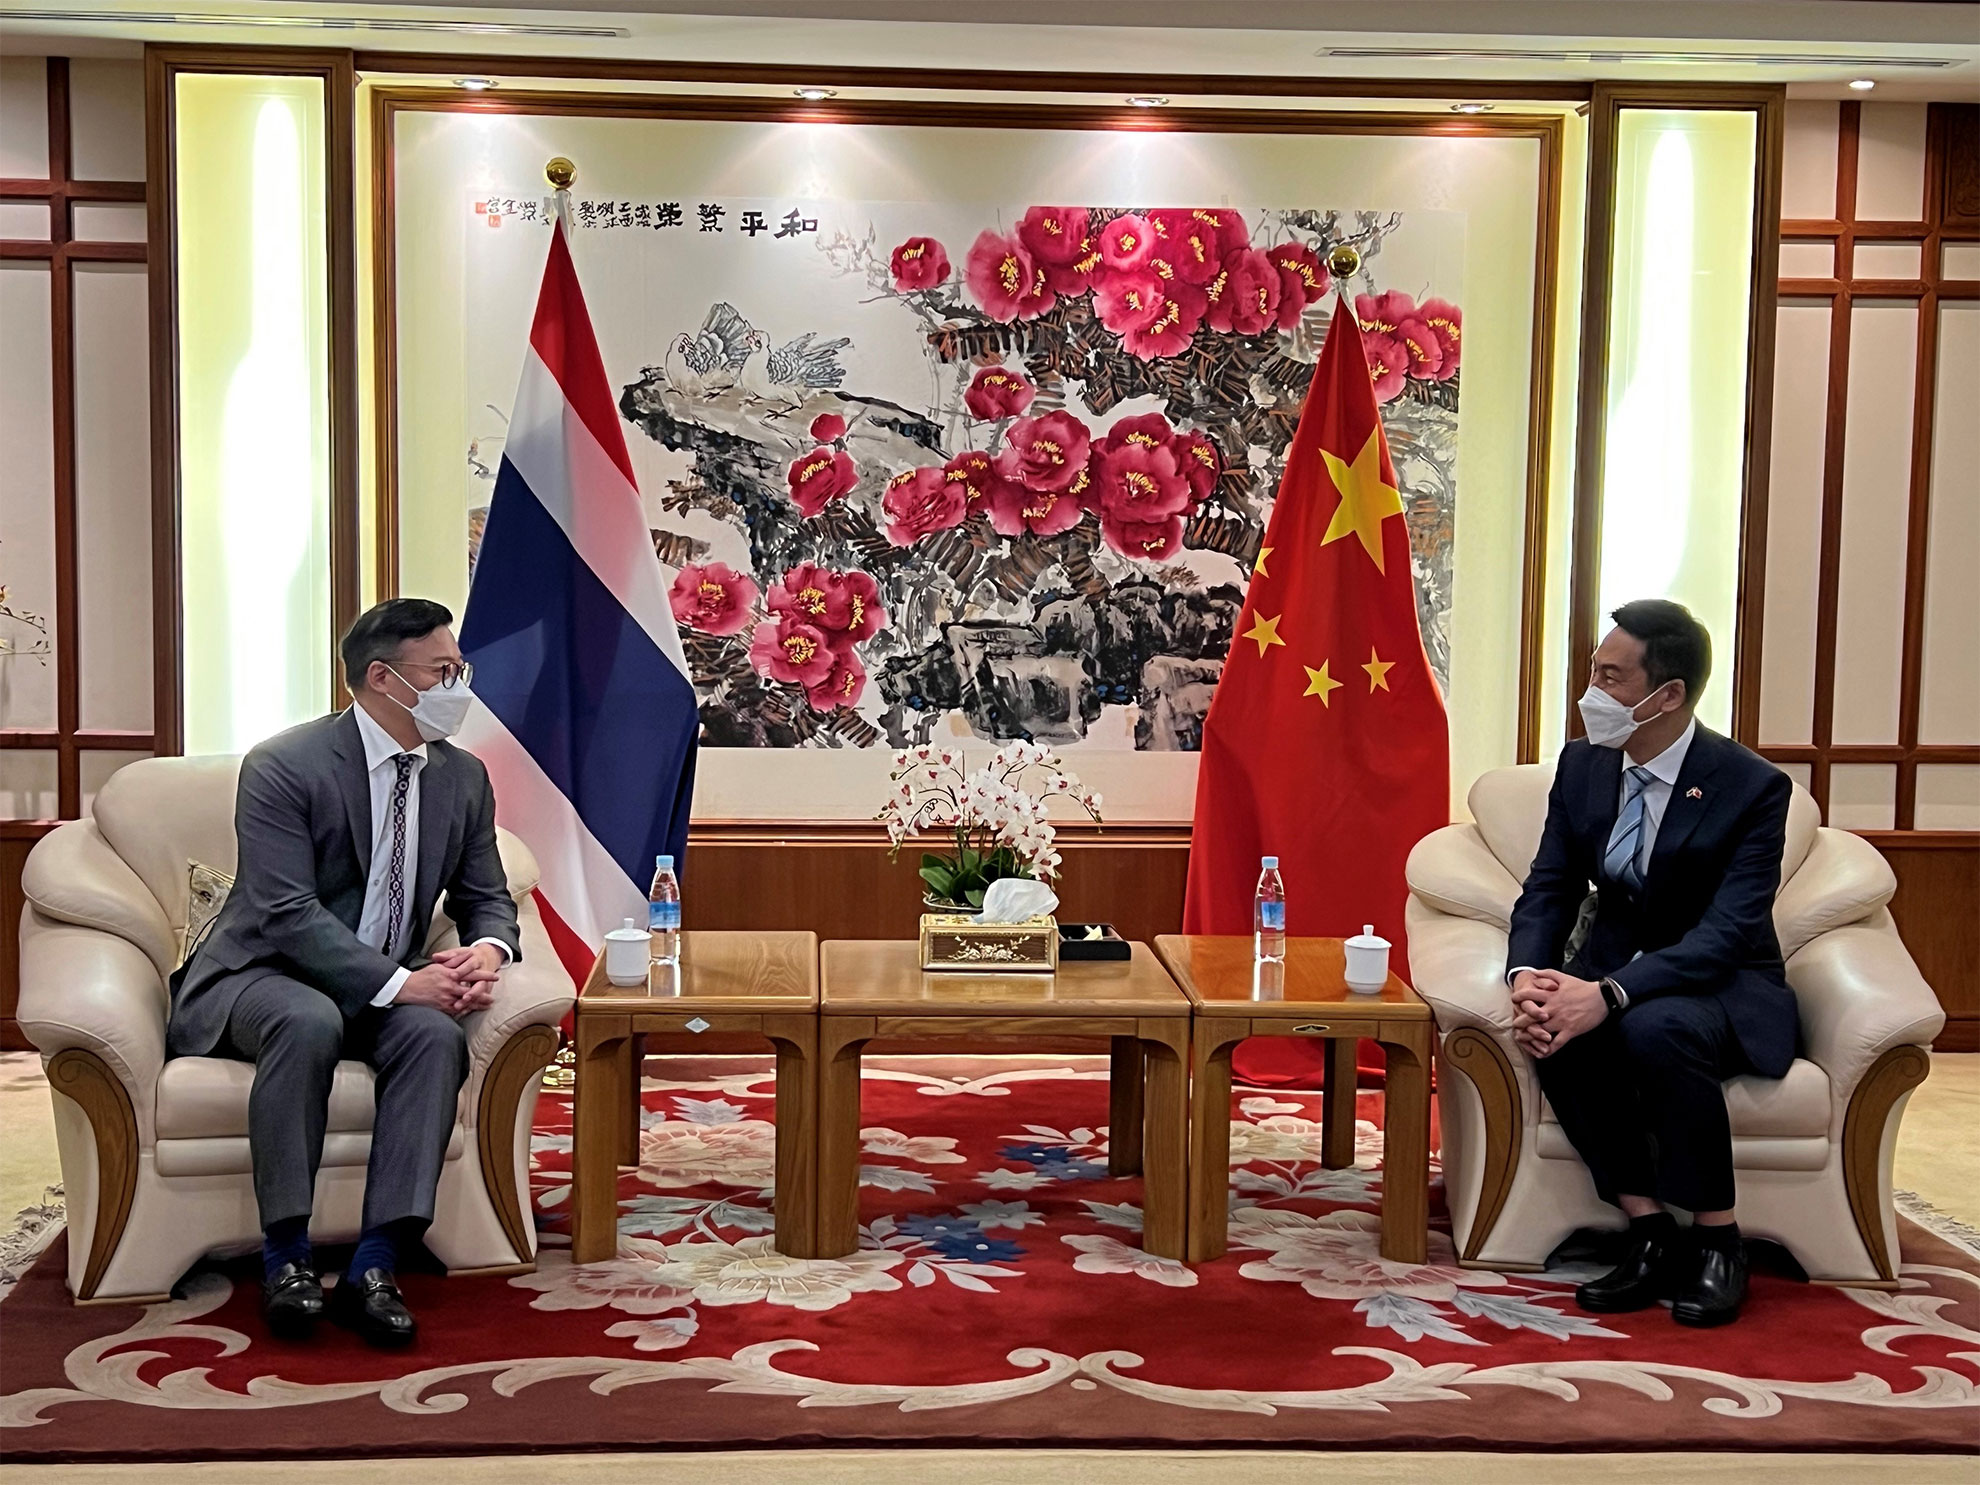 The Deputy Secretary for Justice, Mr Cheung Kwok-kwan (left), called on the Minister Counsellor of the Embassy of the People's Republic of China in the Kingdom of Thailand, Mr Yang Xin (right), in Bangkok, Thailand, today (March 16).